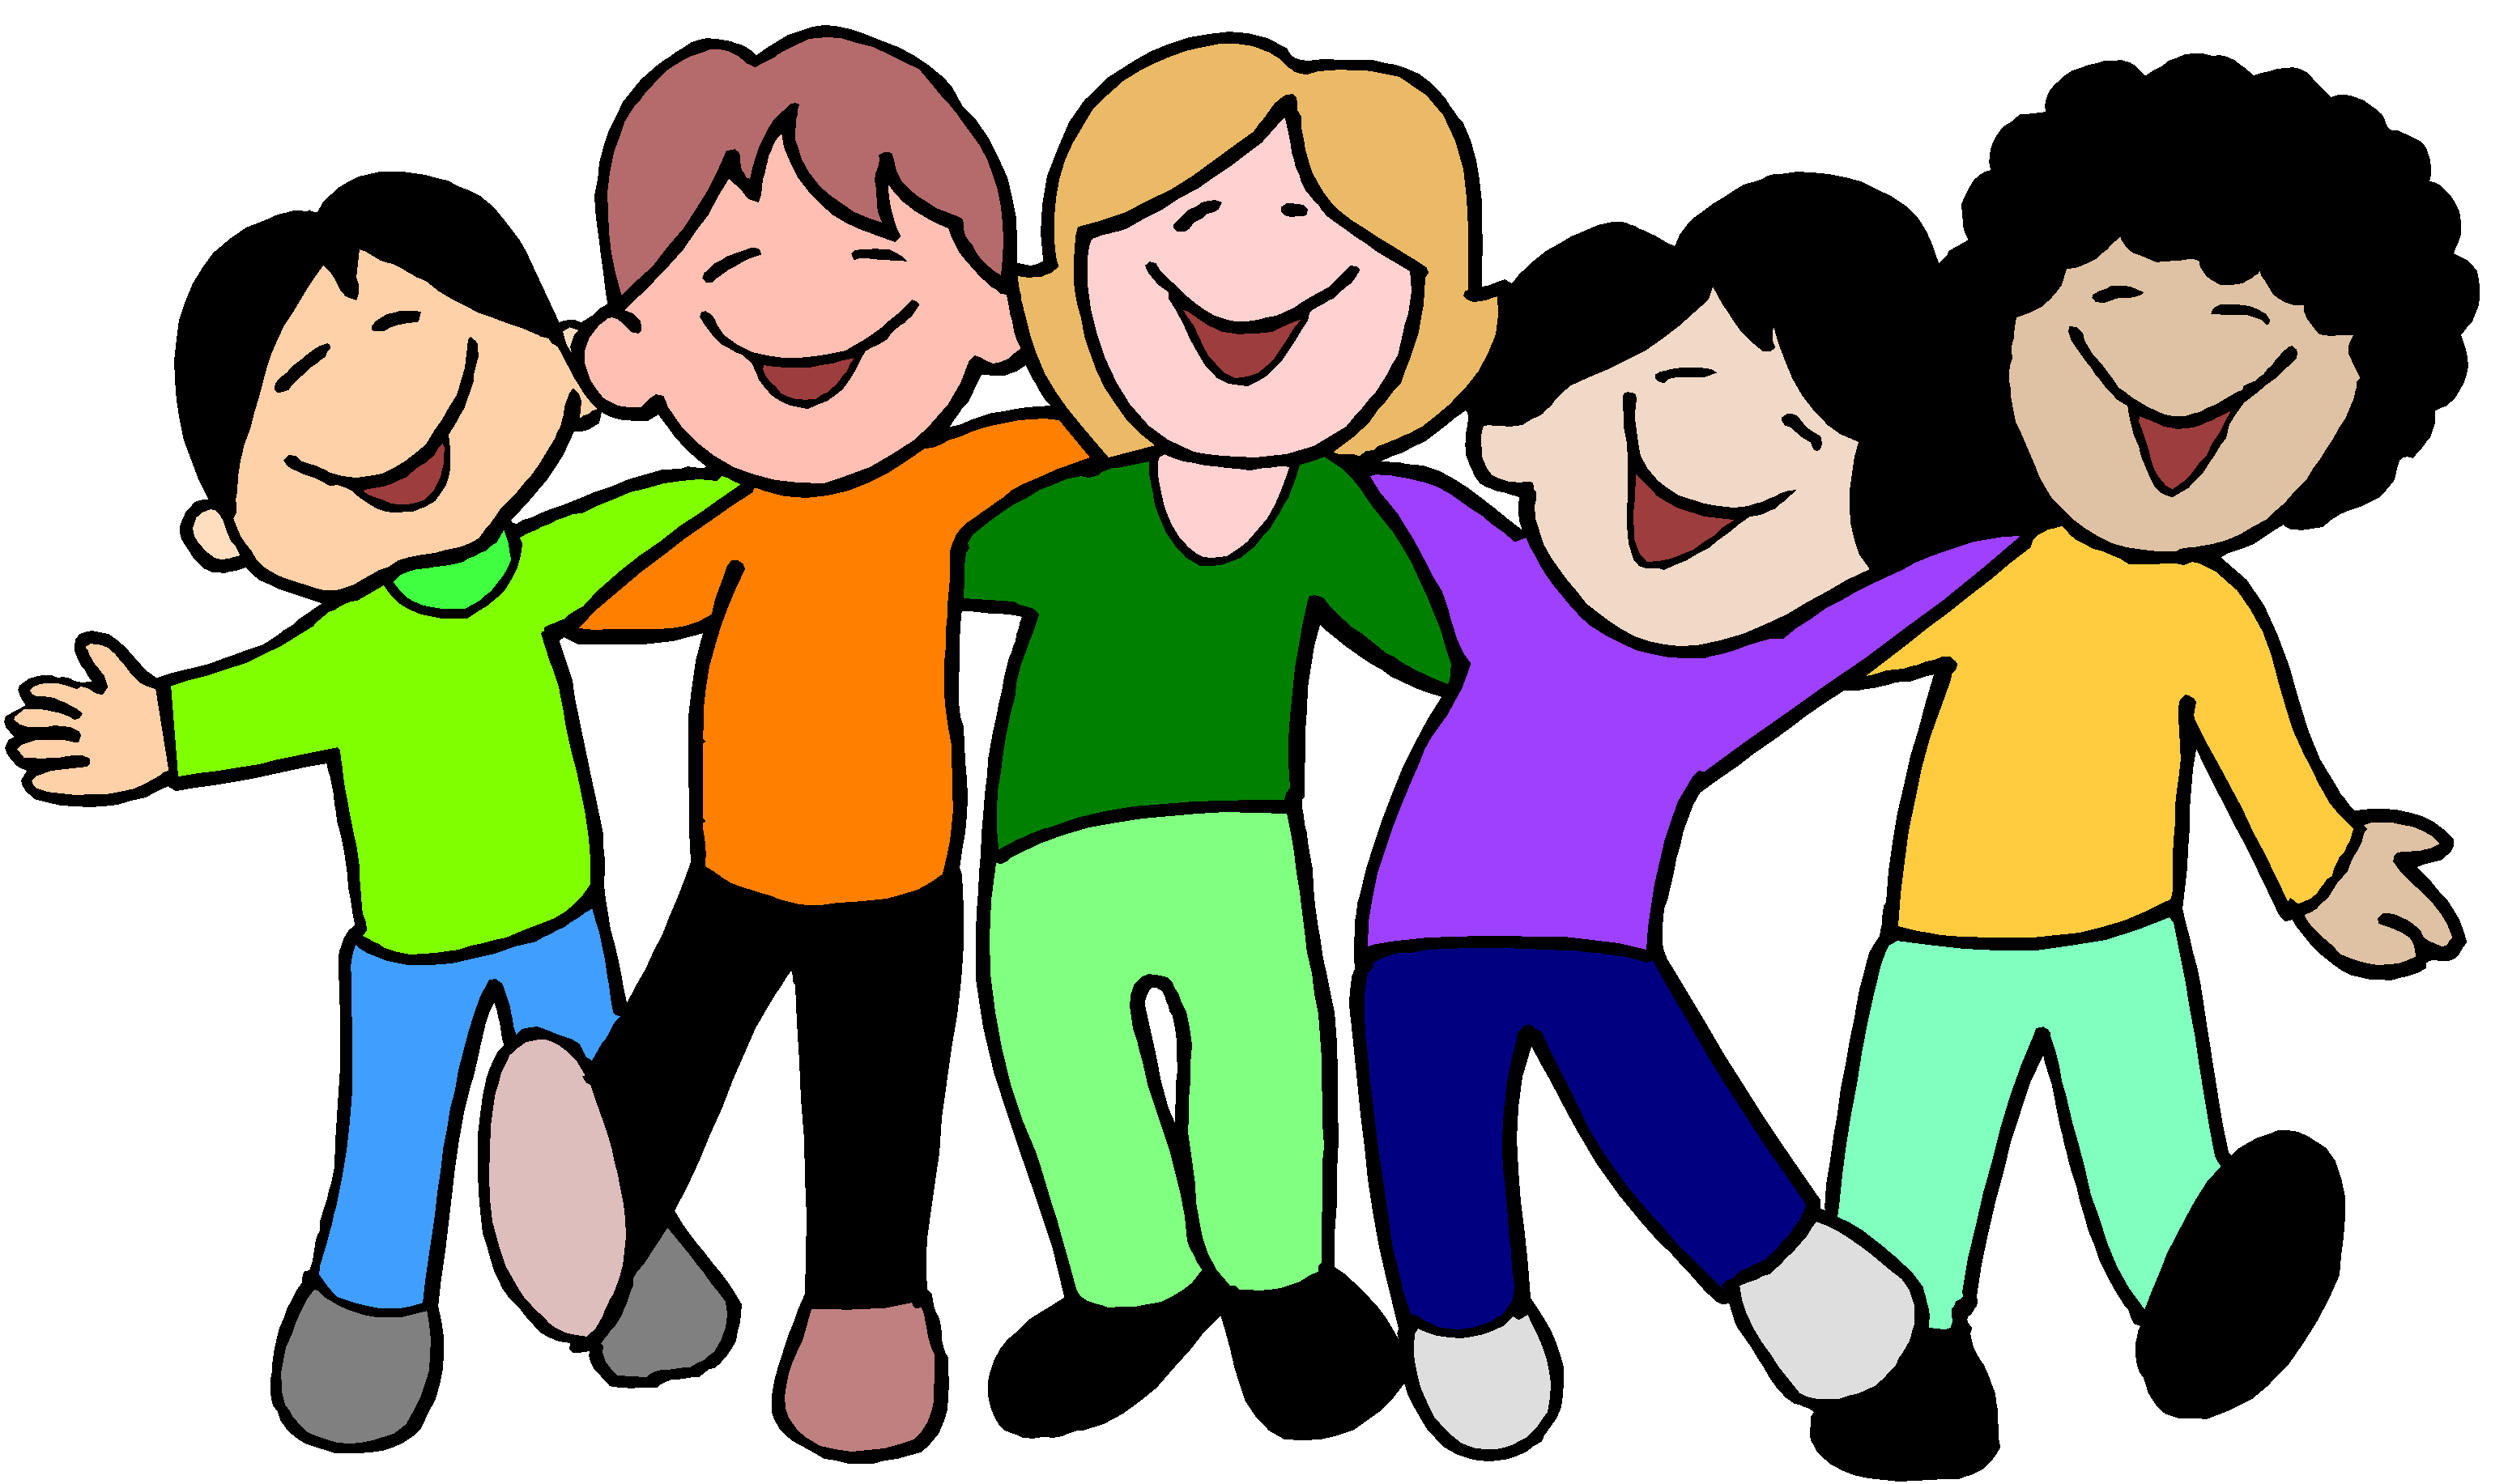 Children playing clipart 7